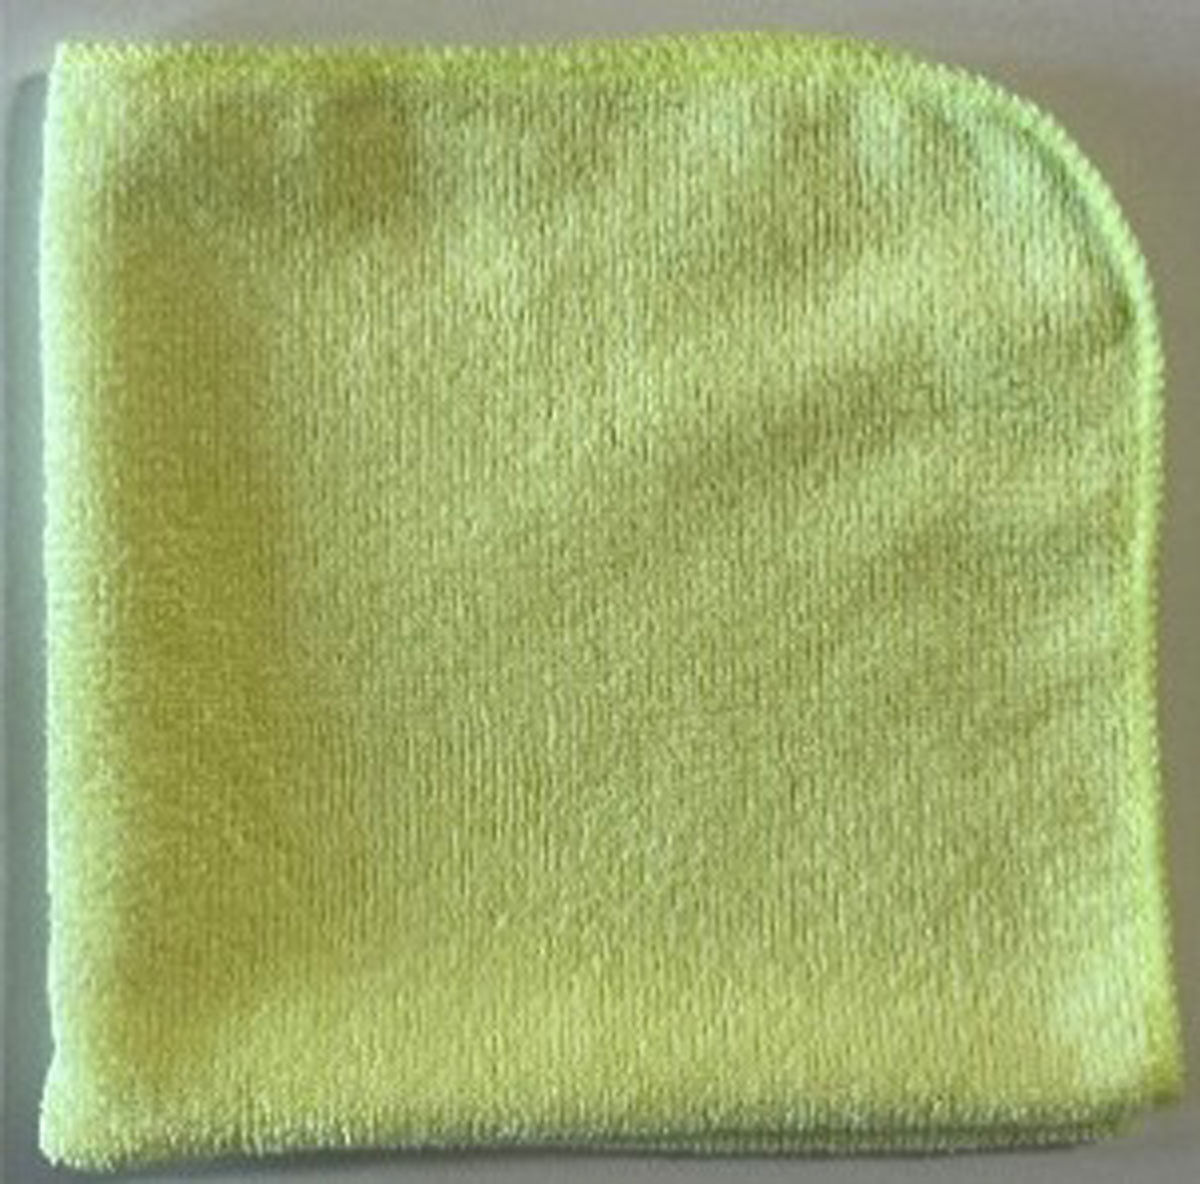 12x12 Yellow Microfiber Cloth Bulk Pack, 250 gsm Questions & Answers